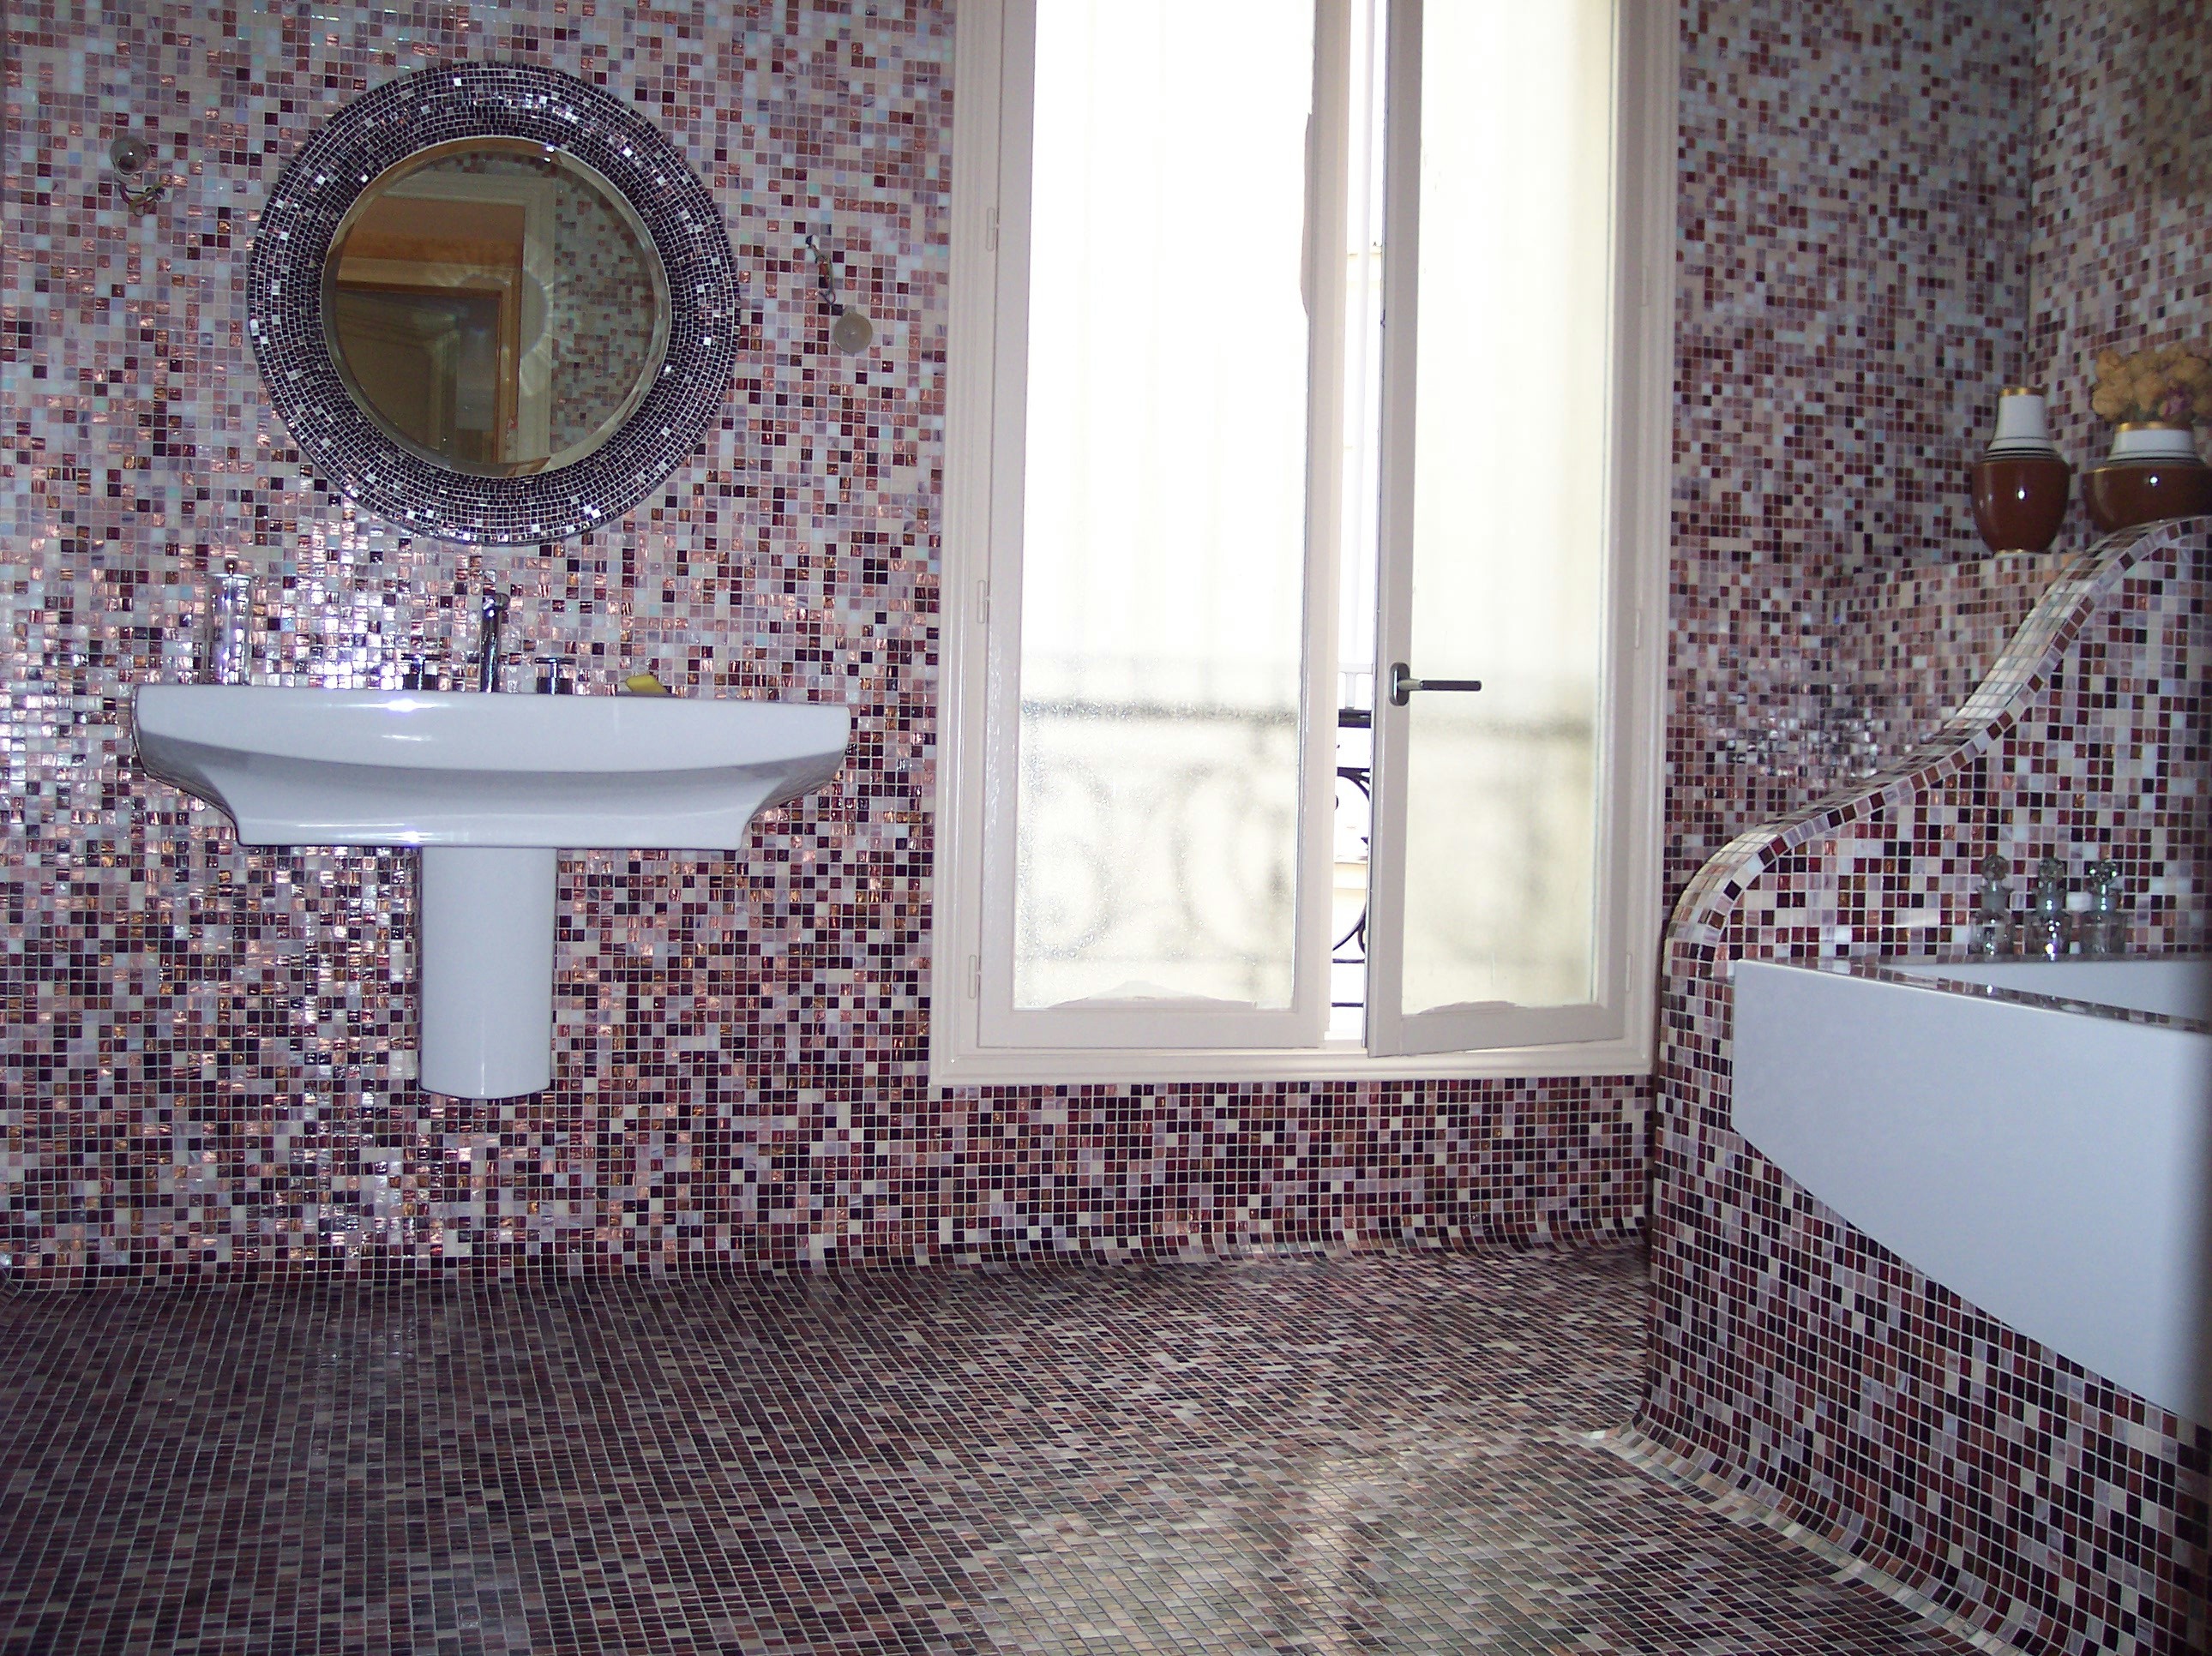 Floor mosaic with rounded corners and sculpted mosaic mirror